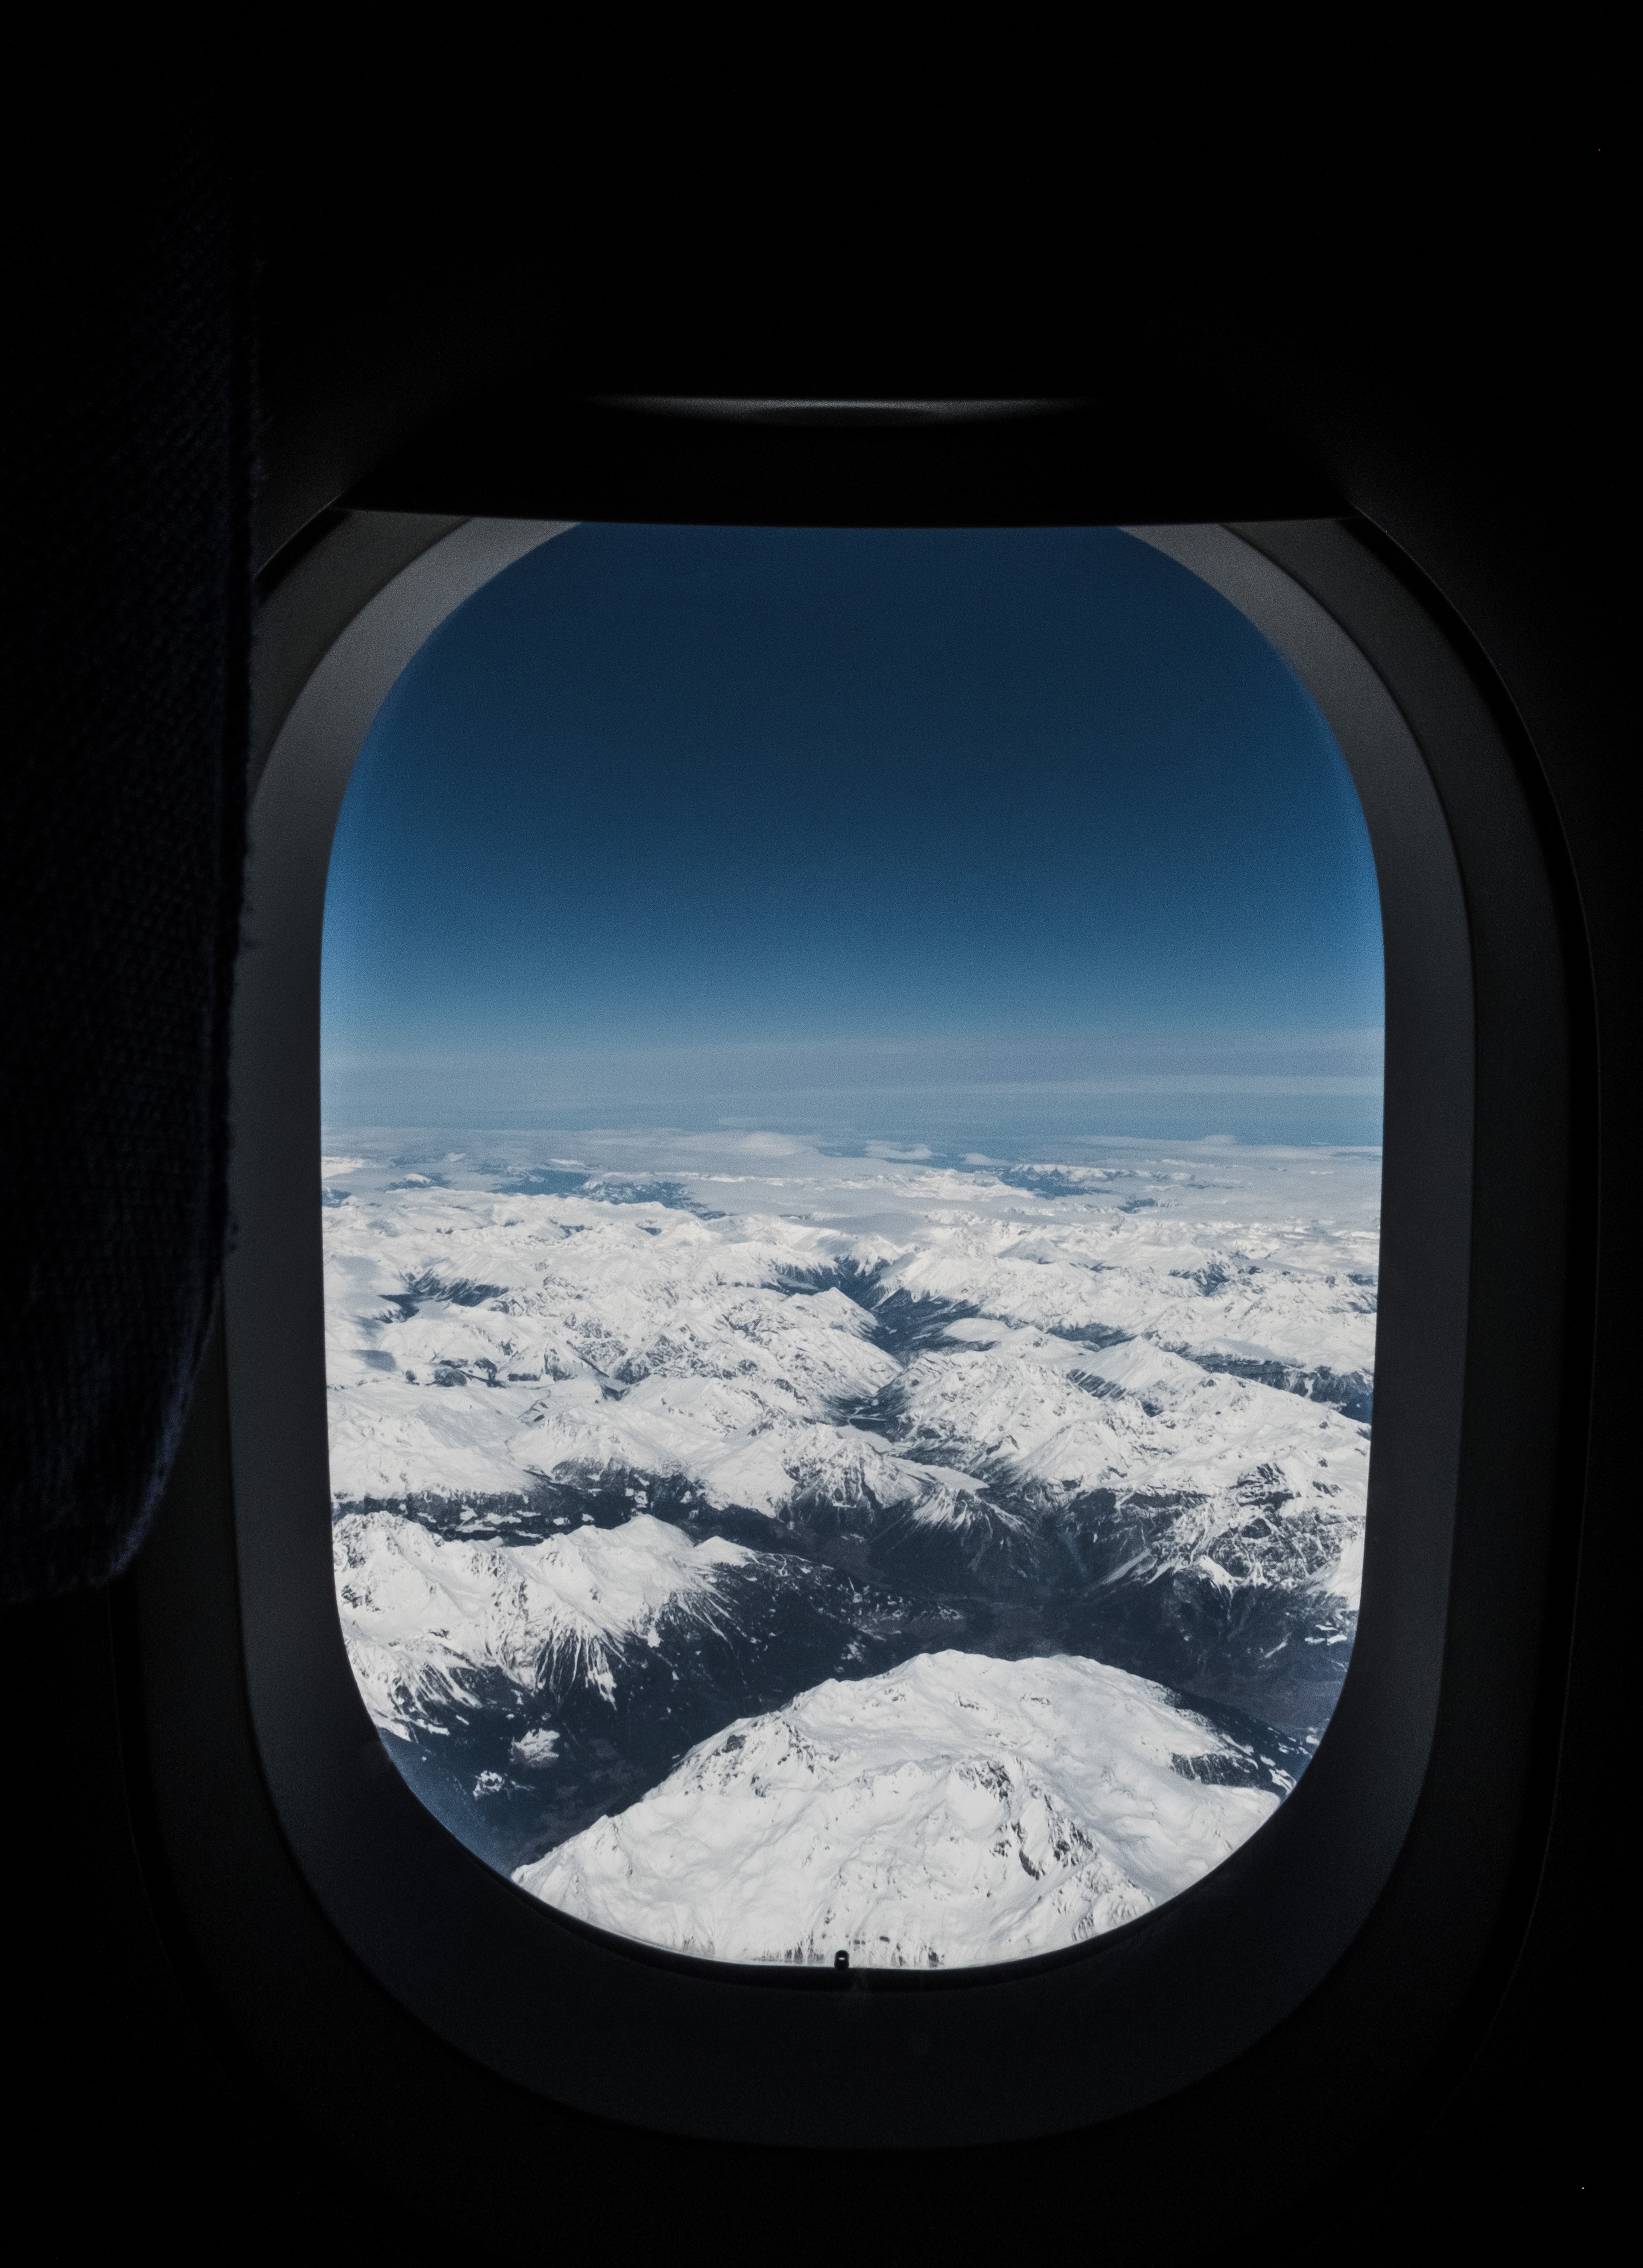 wallpapers tops, miscellaneous, airplane window, sky, mountains, view from above, vertex, miscellanea, flight, porthole, plane window